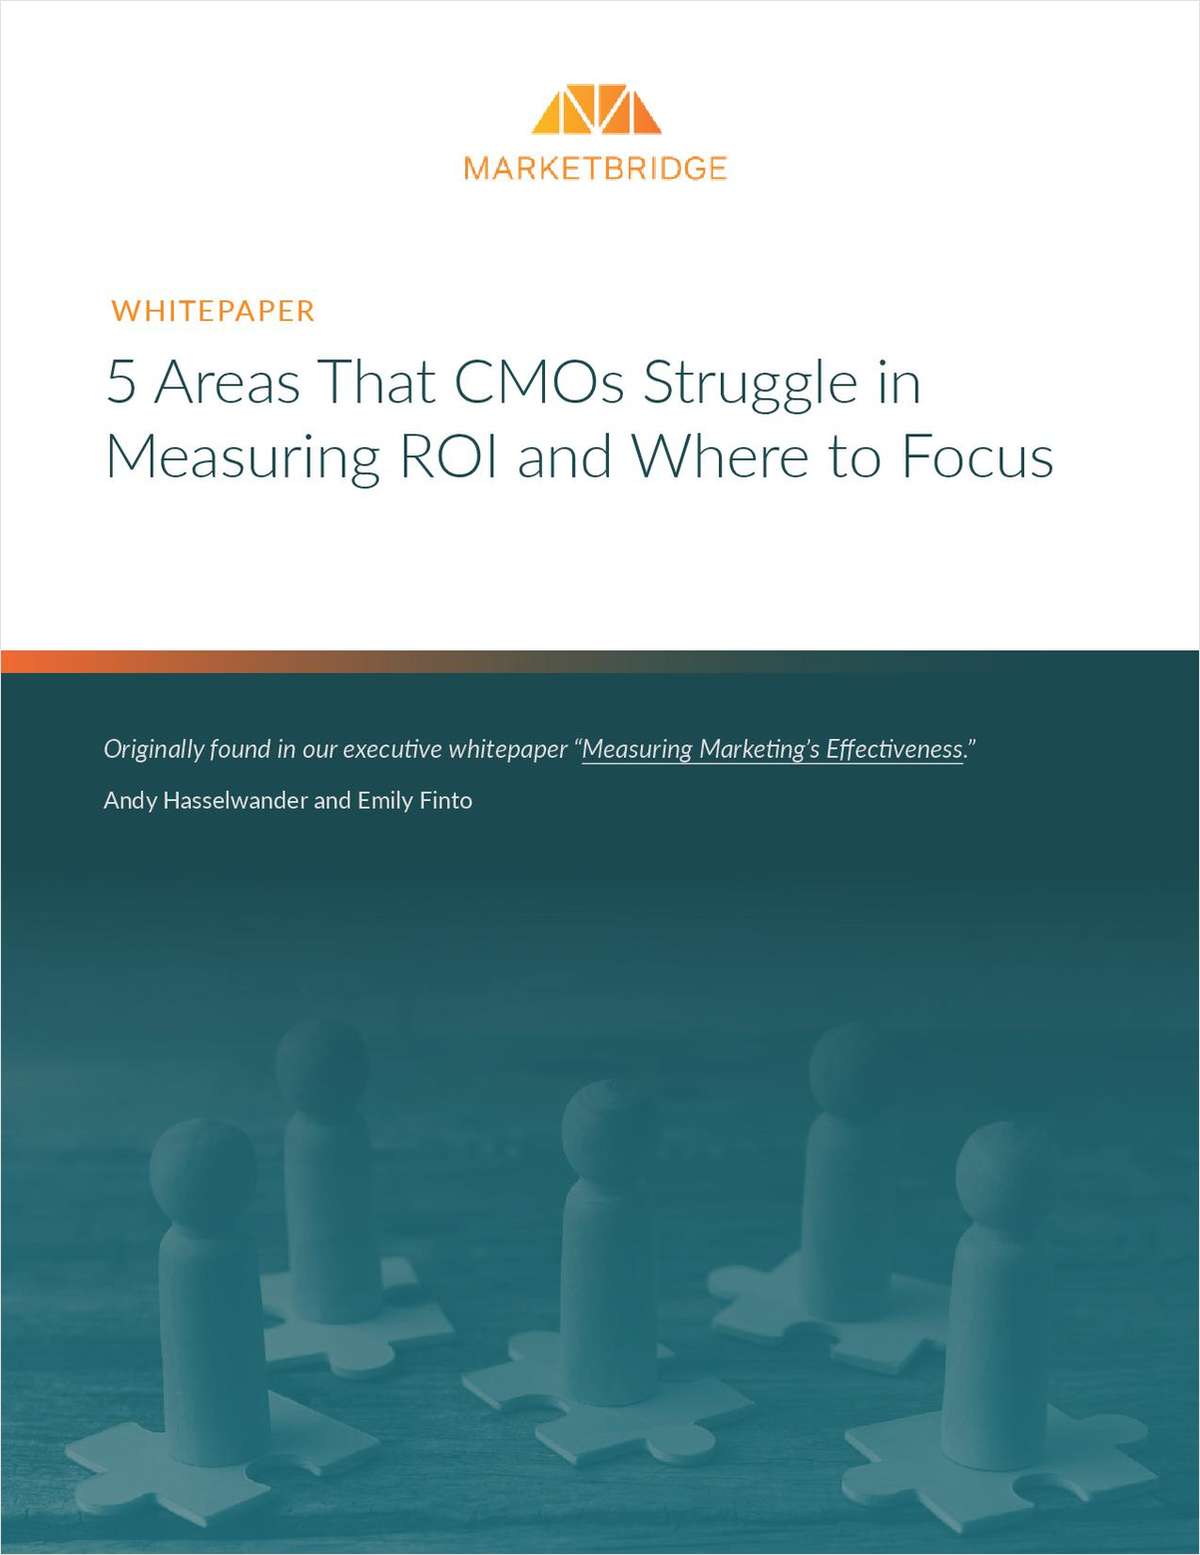 5 Areas That CMOs Struggle in Measuring ROI and Where to Focus